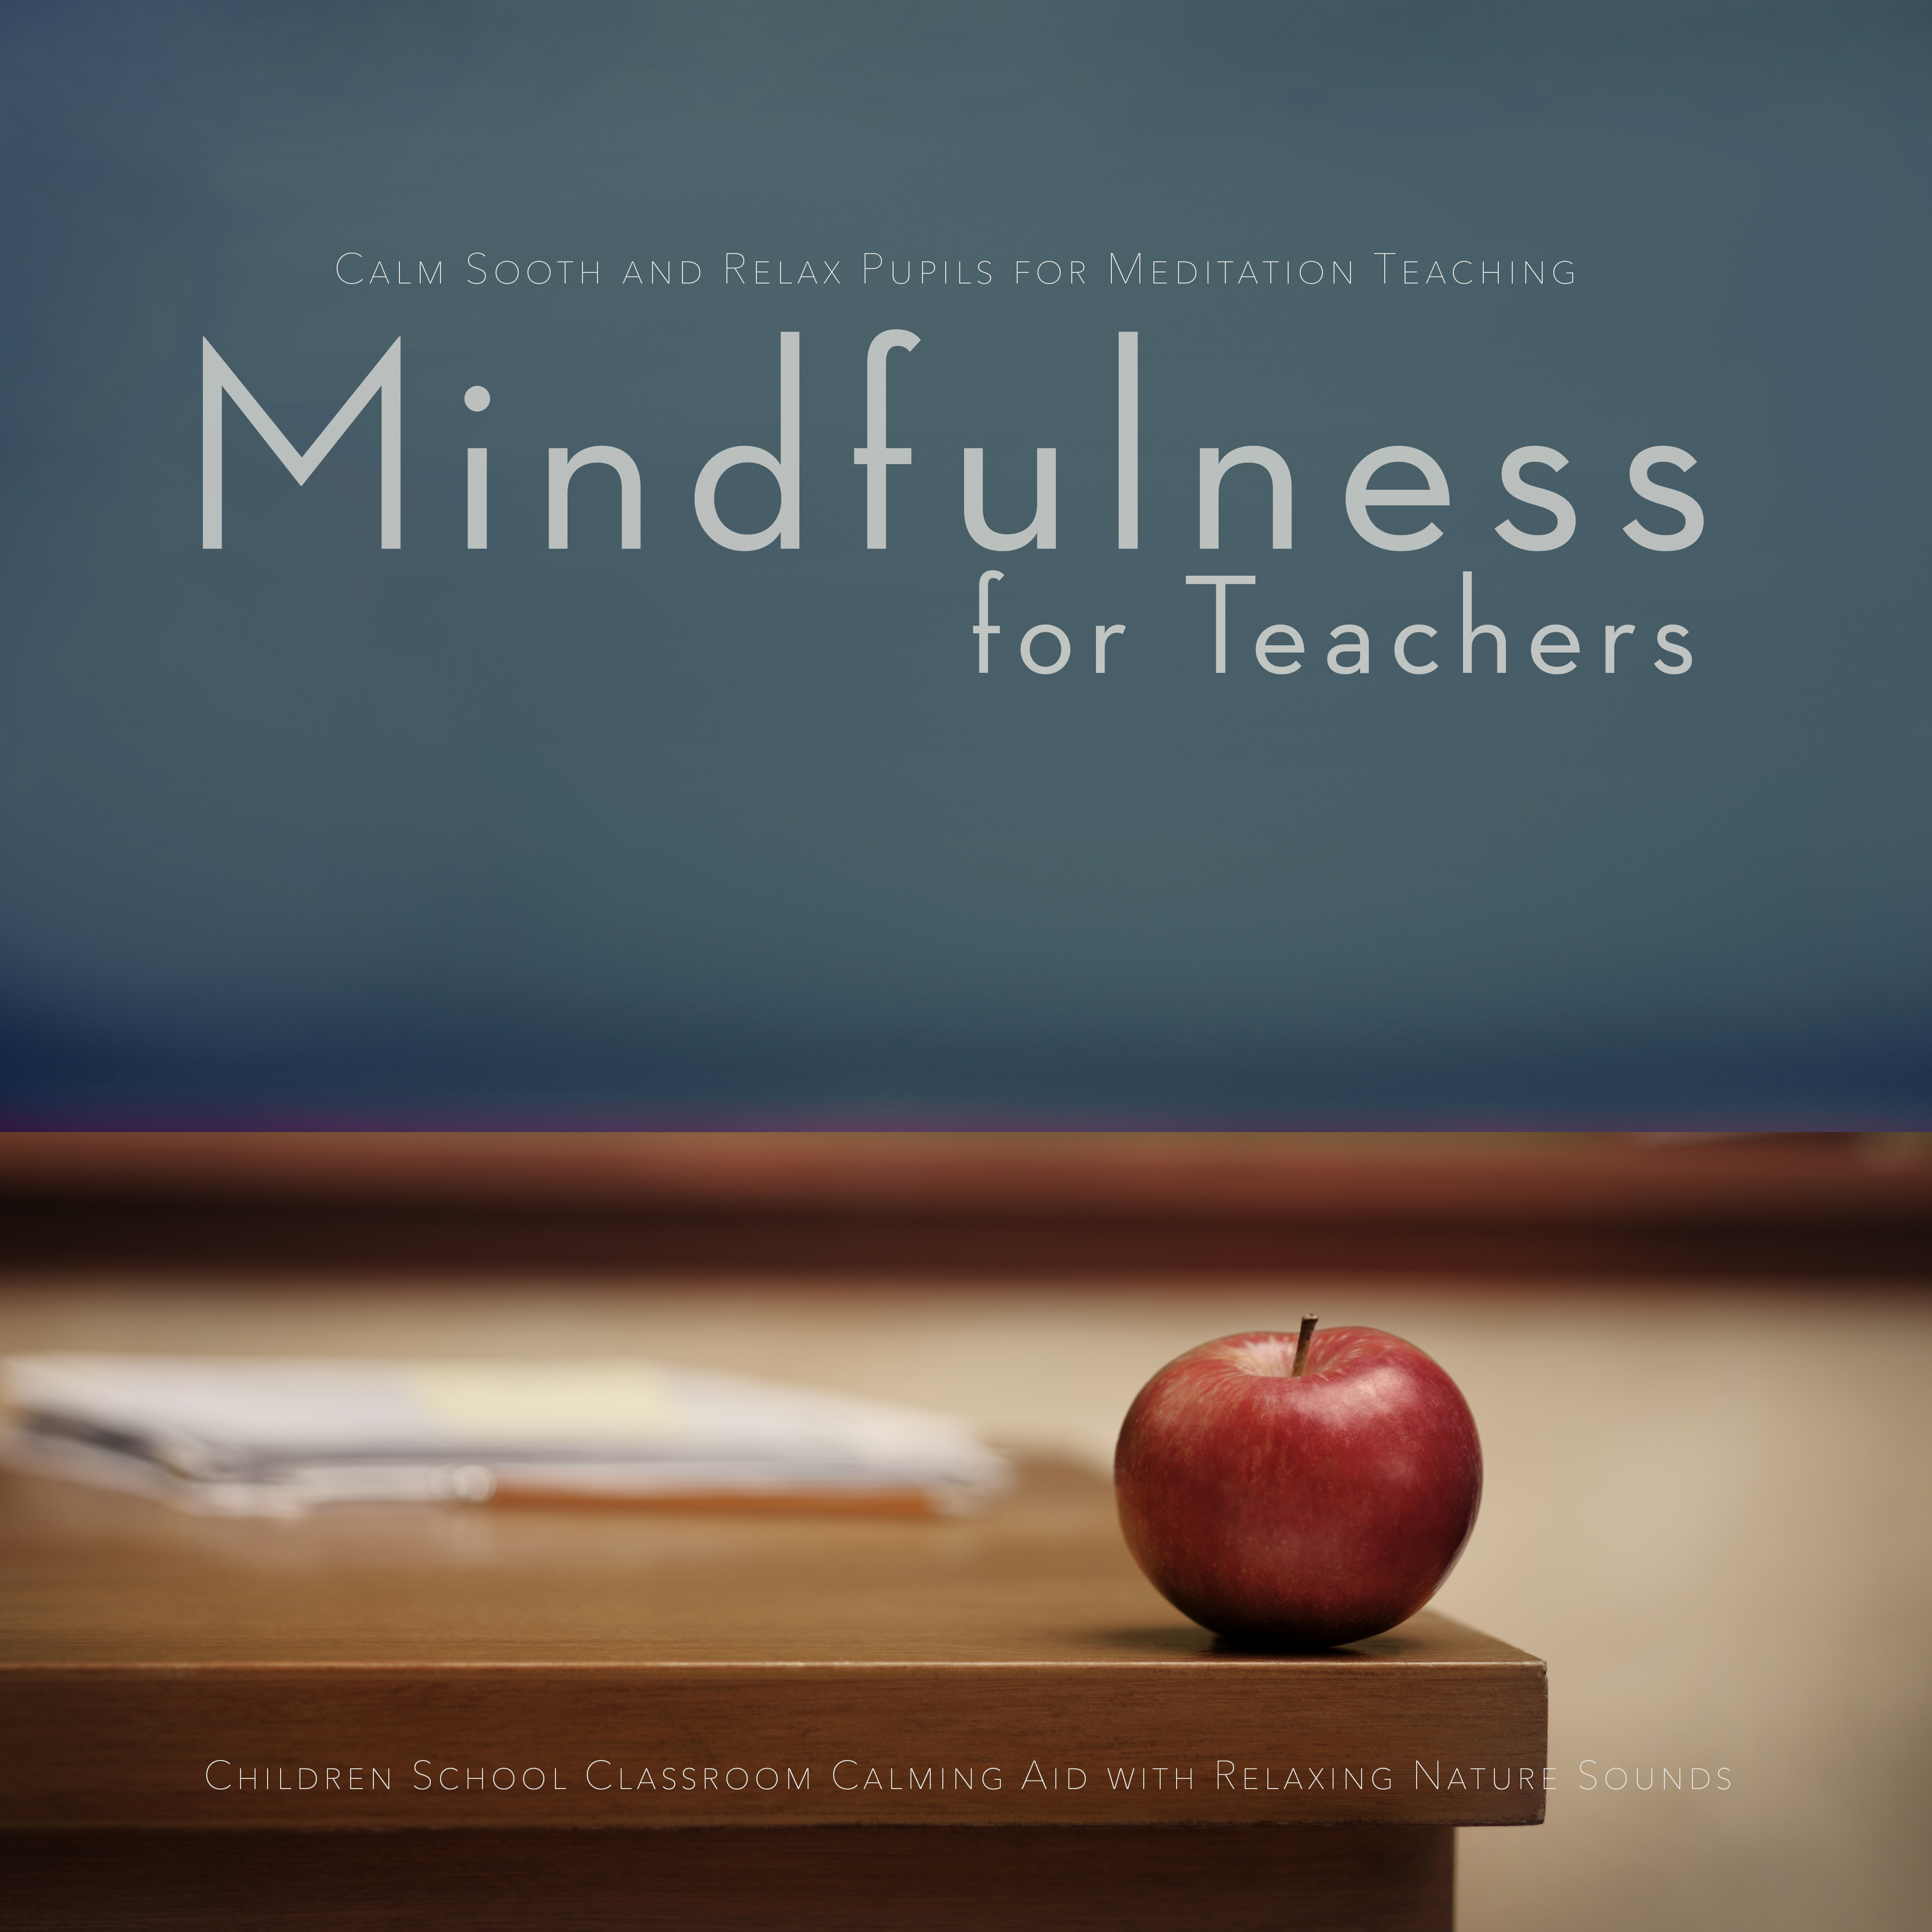 Mindfulness for Teachers: Children School Classroom Calming Aid with Relaxing Nature Sounds to Calm Sooth and Relax Pupils for Meditation Teaching